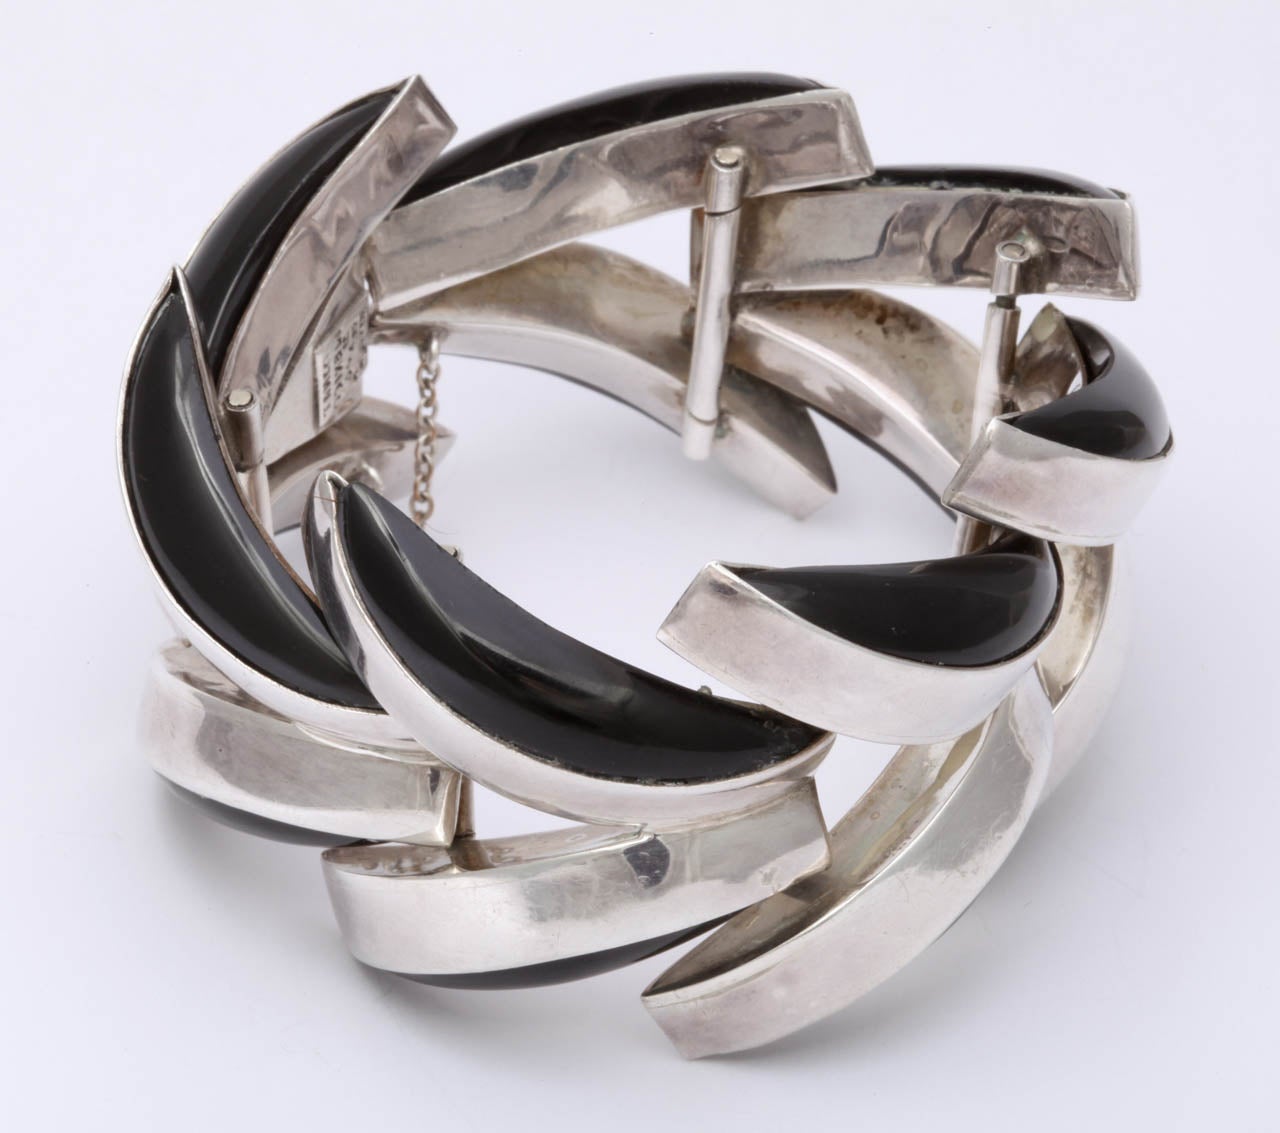 Spectacular and futuristic are words that apply equally to this striking bracelet. The contrast of silver and black is clean and dramatic. Combined here in huge chevron or v shaped links, both design and color give this 1950's bracelet a timeless